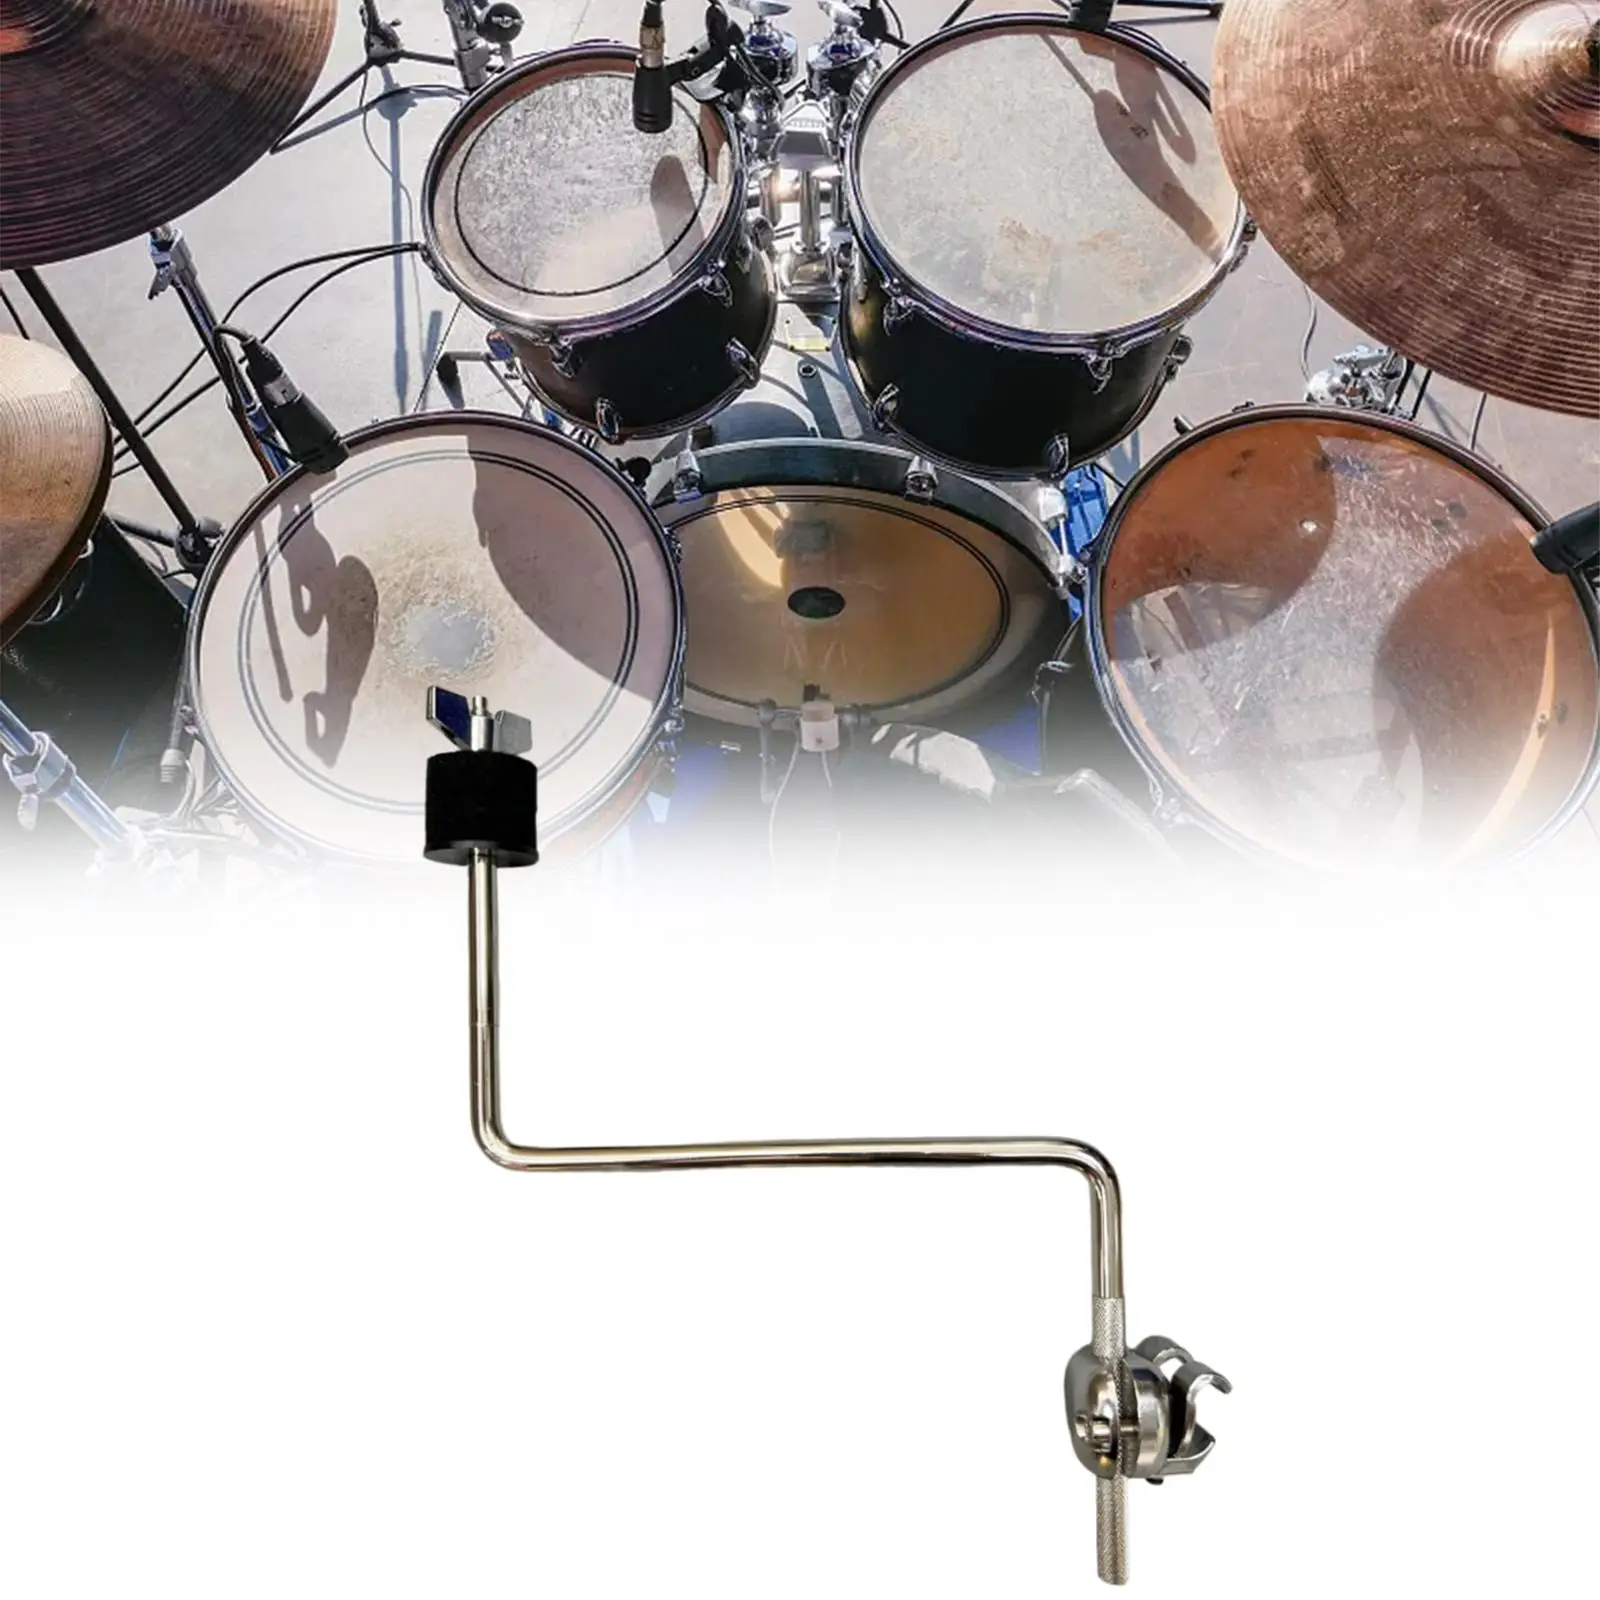 Cymbal Mount, Percussion Cymbal Mounting Arms Replacements Sturdy Z Shaped